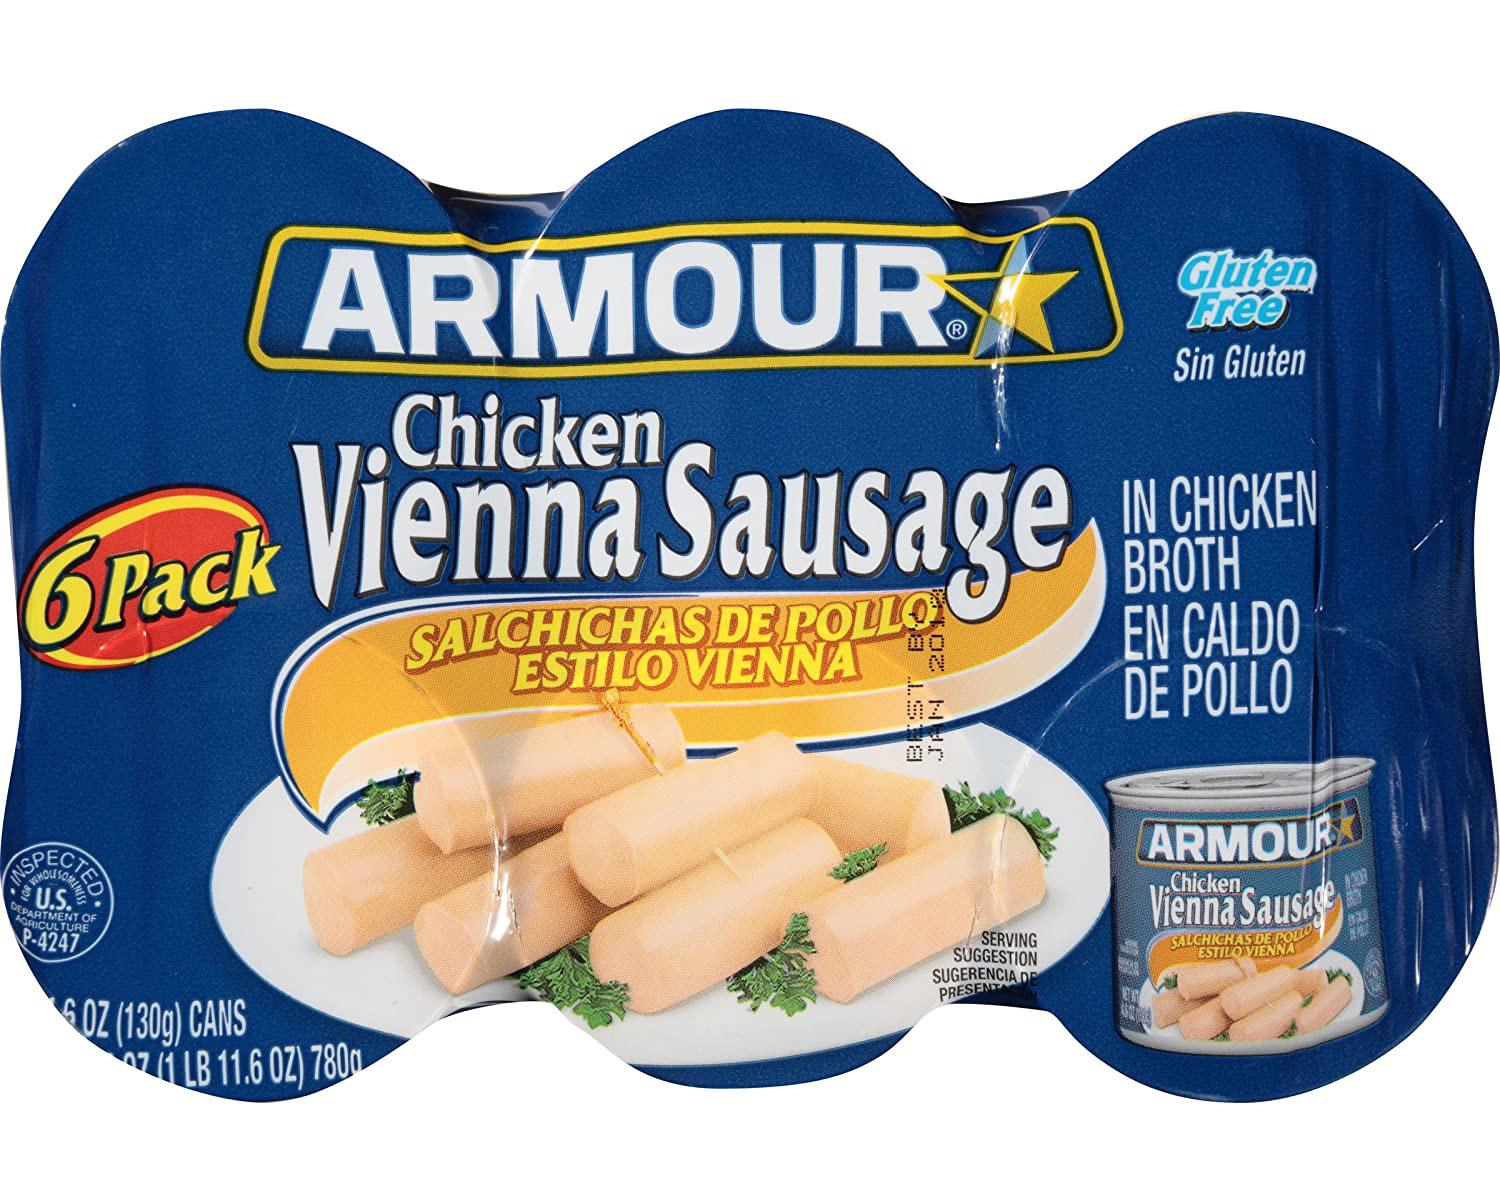 6-Pack Armour Chicken Vienna Sausage for $2.28 Shipped